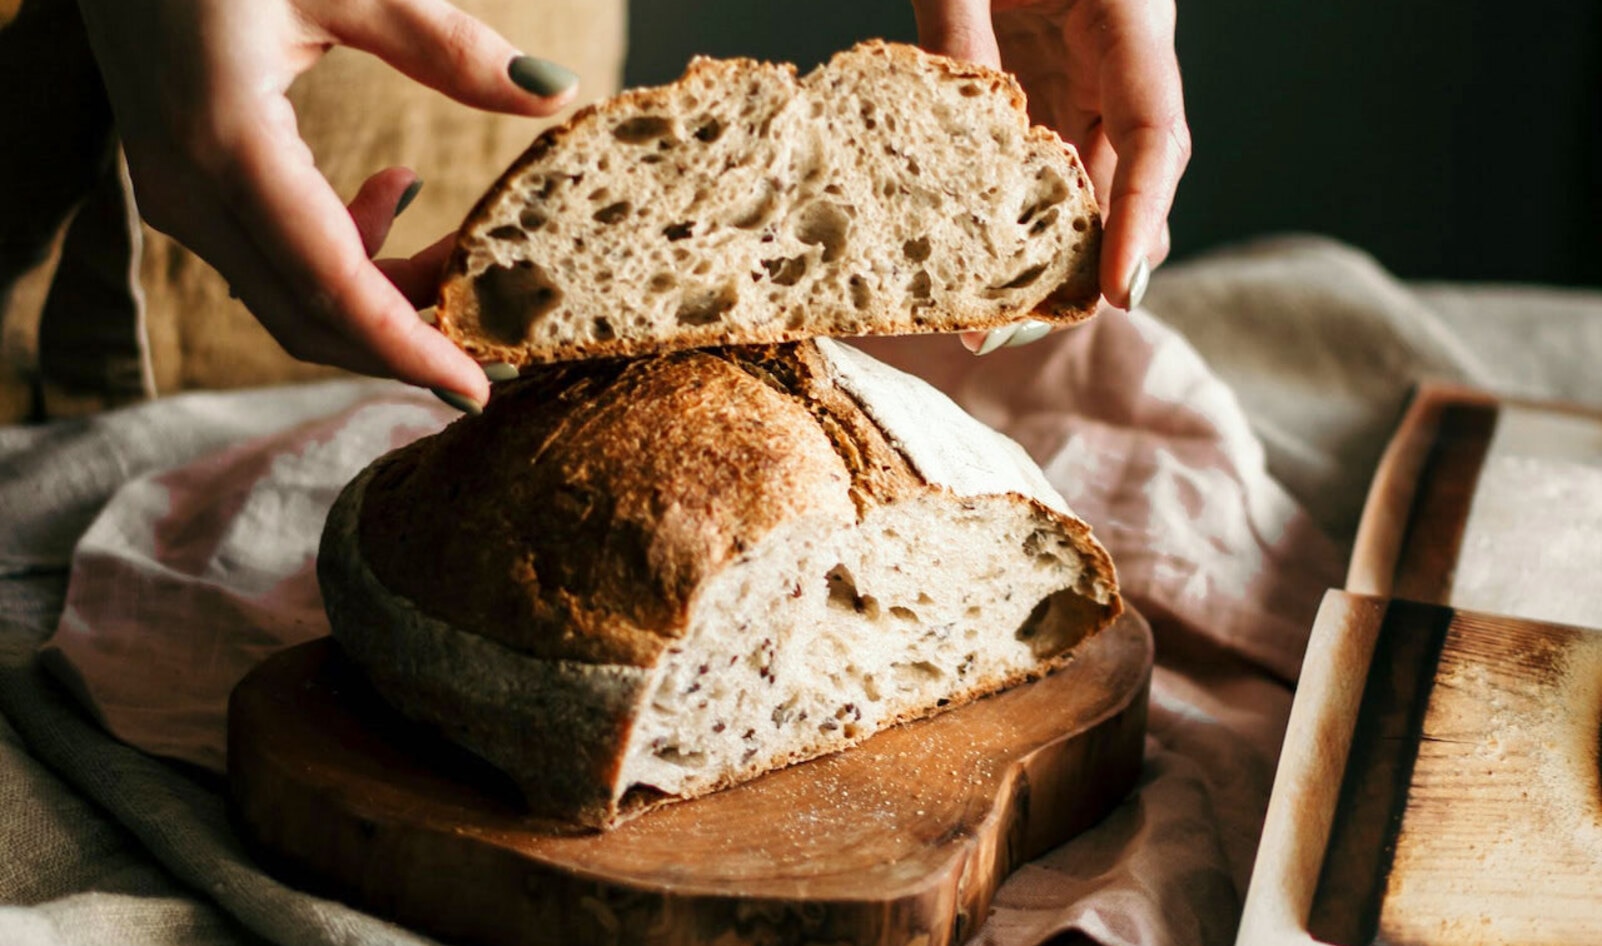 11 Vegan Bread Recipes to Make With Your Sourdough Starter